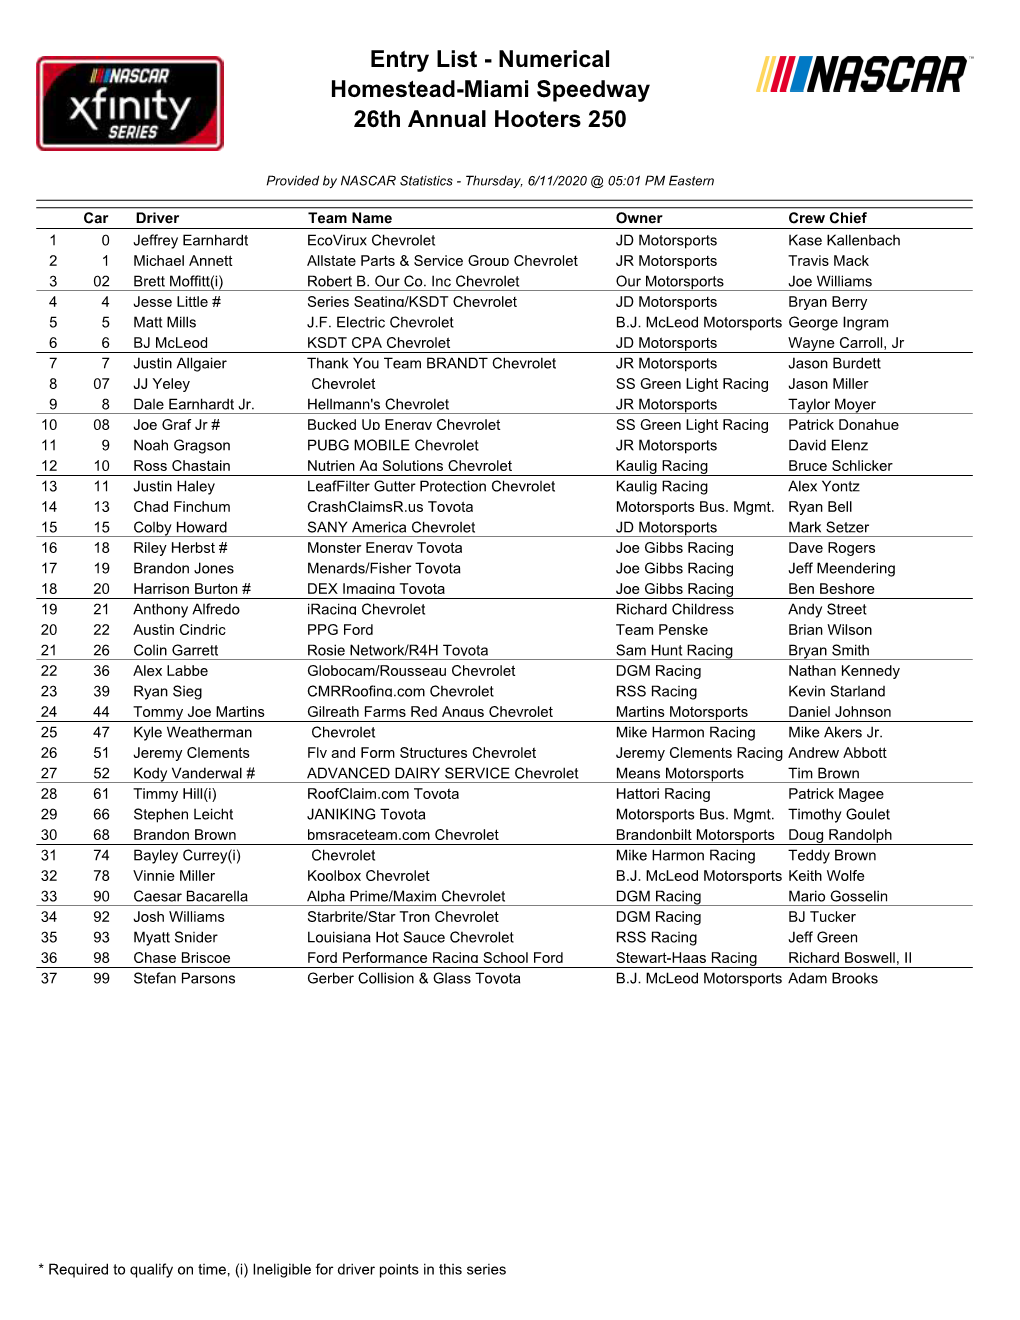 Entry List - Numerical Homestead-Miami Speedway 26Th Annual Hooters 250